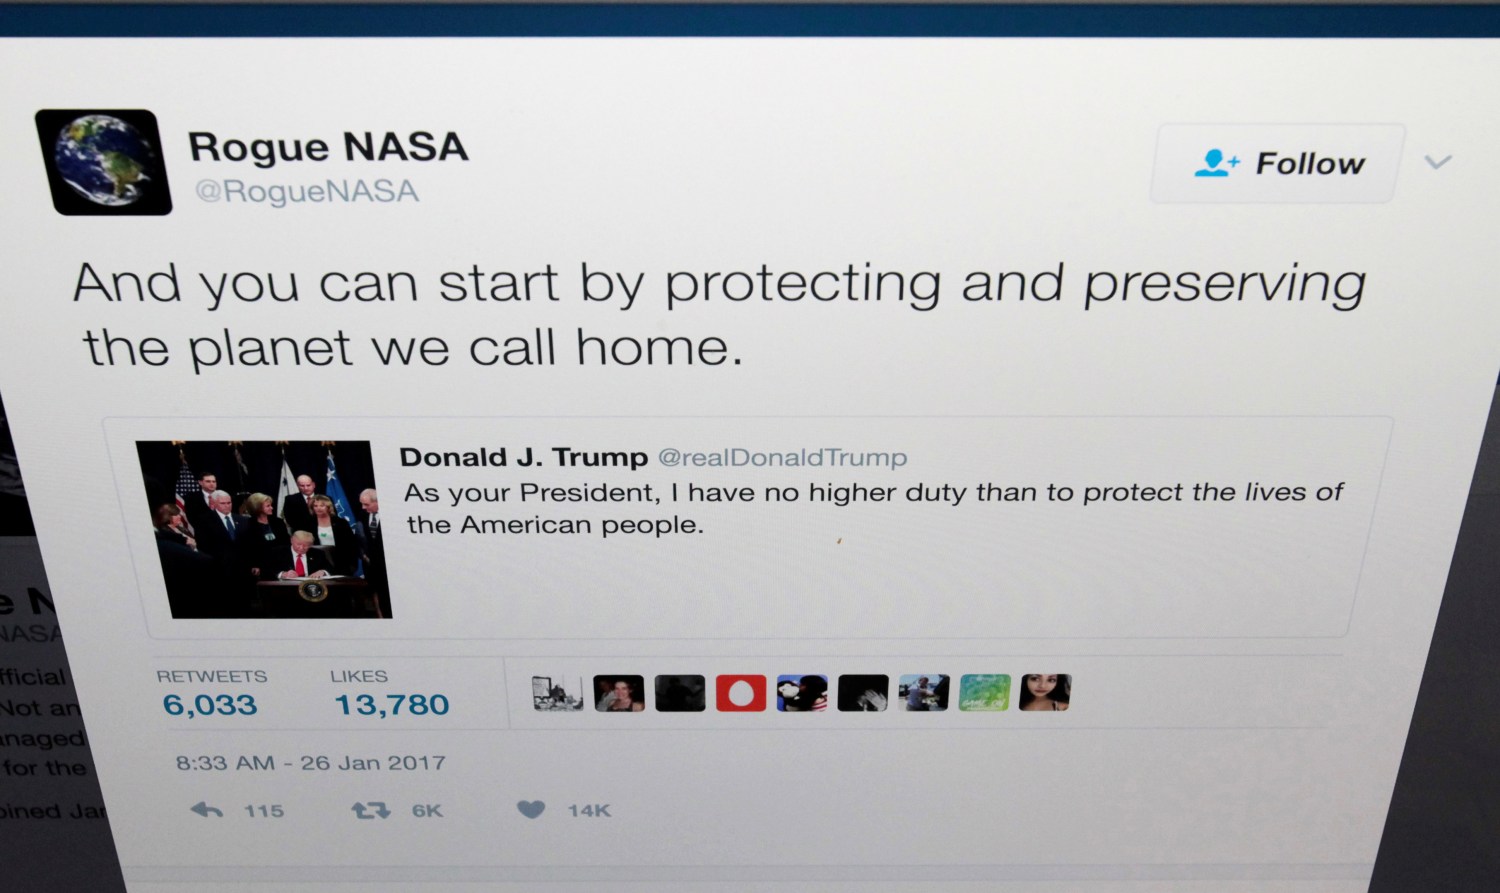 The Twitter account of Rogue NASA is seen replying to a tweet by U.S. President Donald Trump in a photo illustration in Toronto, Ontario, Canada January 26, 2017